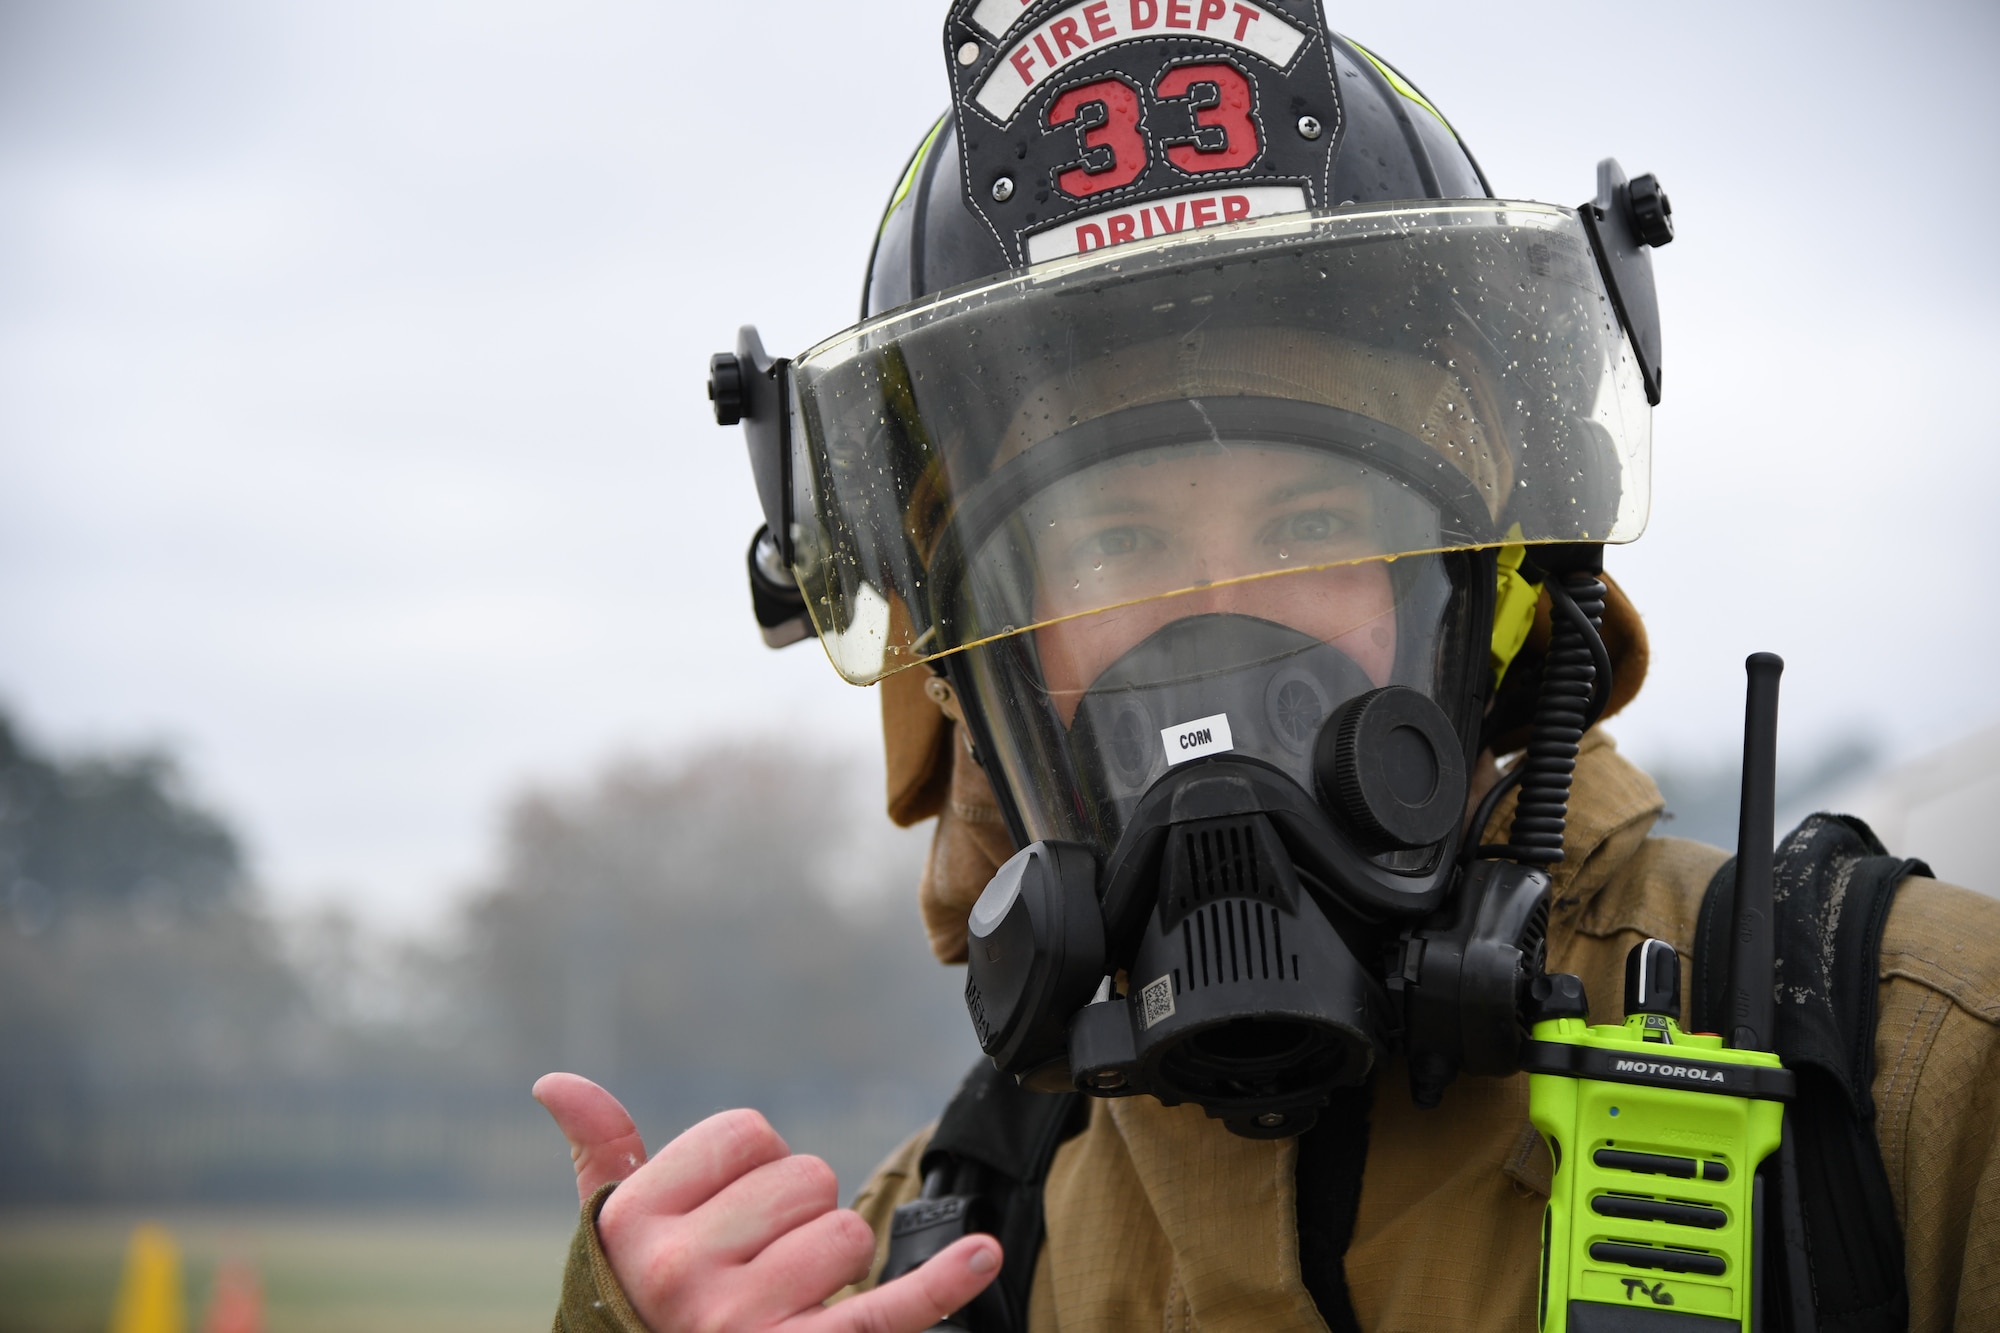 Seth Corn, 81st Infrastructure Division firefighter, poses for a photo after extinguishing a fire inside a mock C-123 training device during an aircraft rescue fire fighting training exercise at Keesler Air Force Base, Mississippi, Nov. 8, 2019. The five-day joint agency training allowed the Keesler Fire Department and the Gulfport Combat Readiness Training Center Fire Department to meet the semi-annual training requirement to practice aircraft rescue and live fire training evolutions. (U.S. Air Force photo by Kemberly Groue)